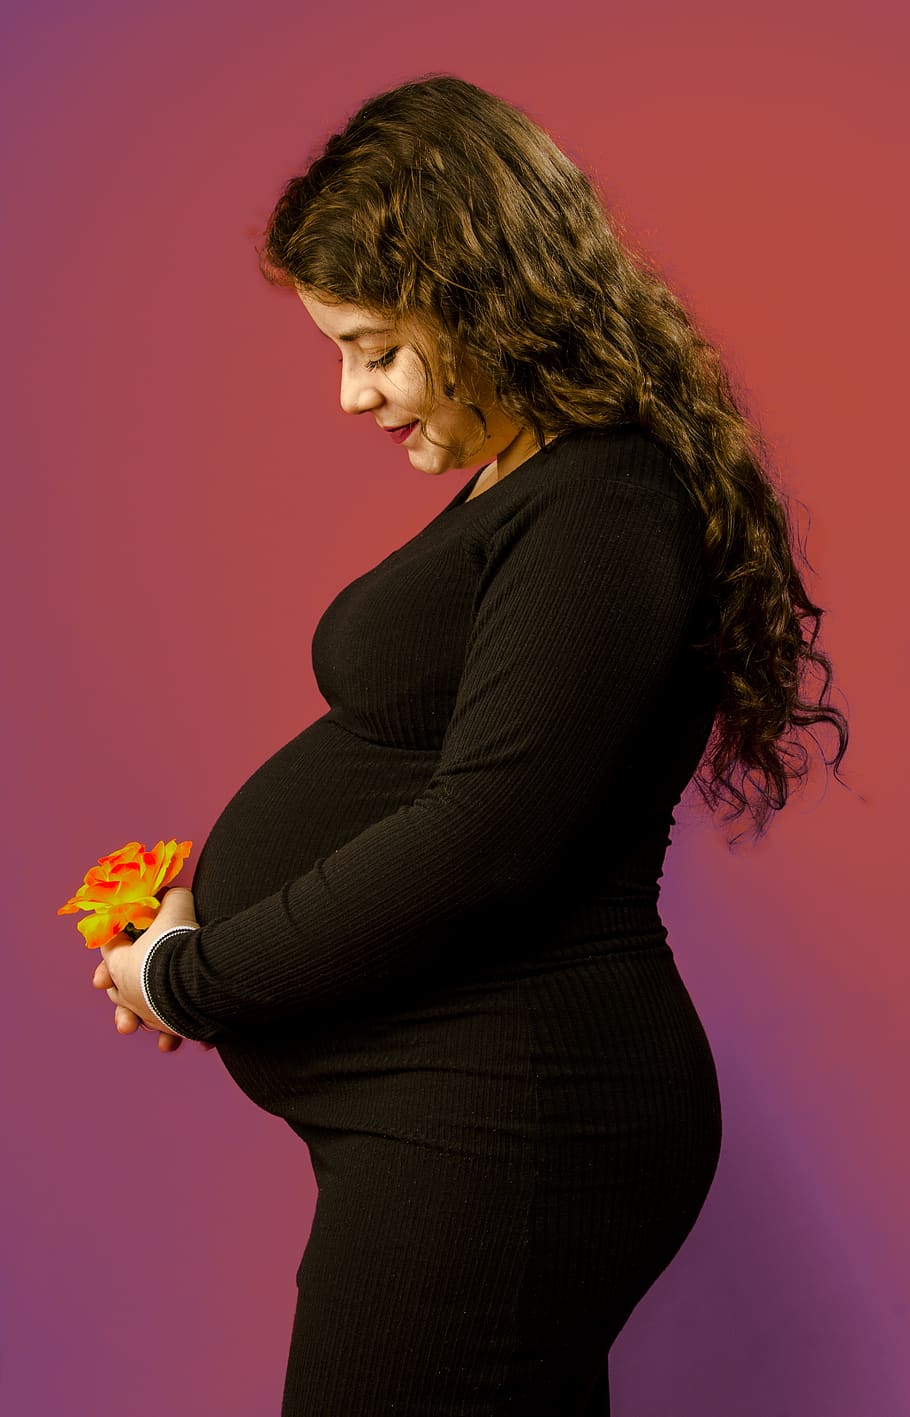 pregnant woman, woman, flower, belly, mother, pregnant, big belly, baby, maternity, mom